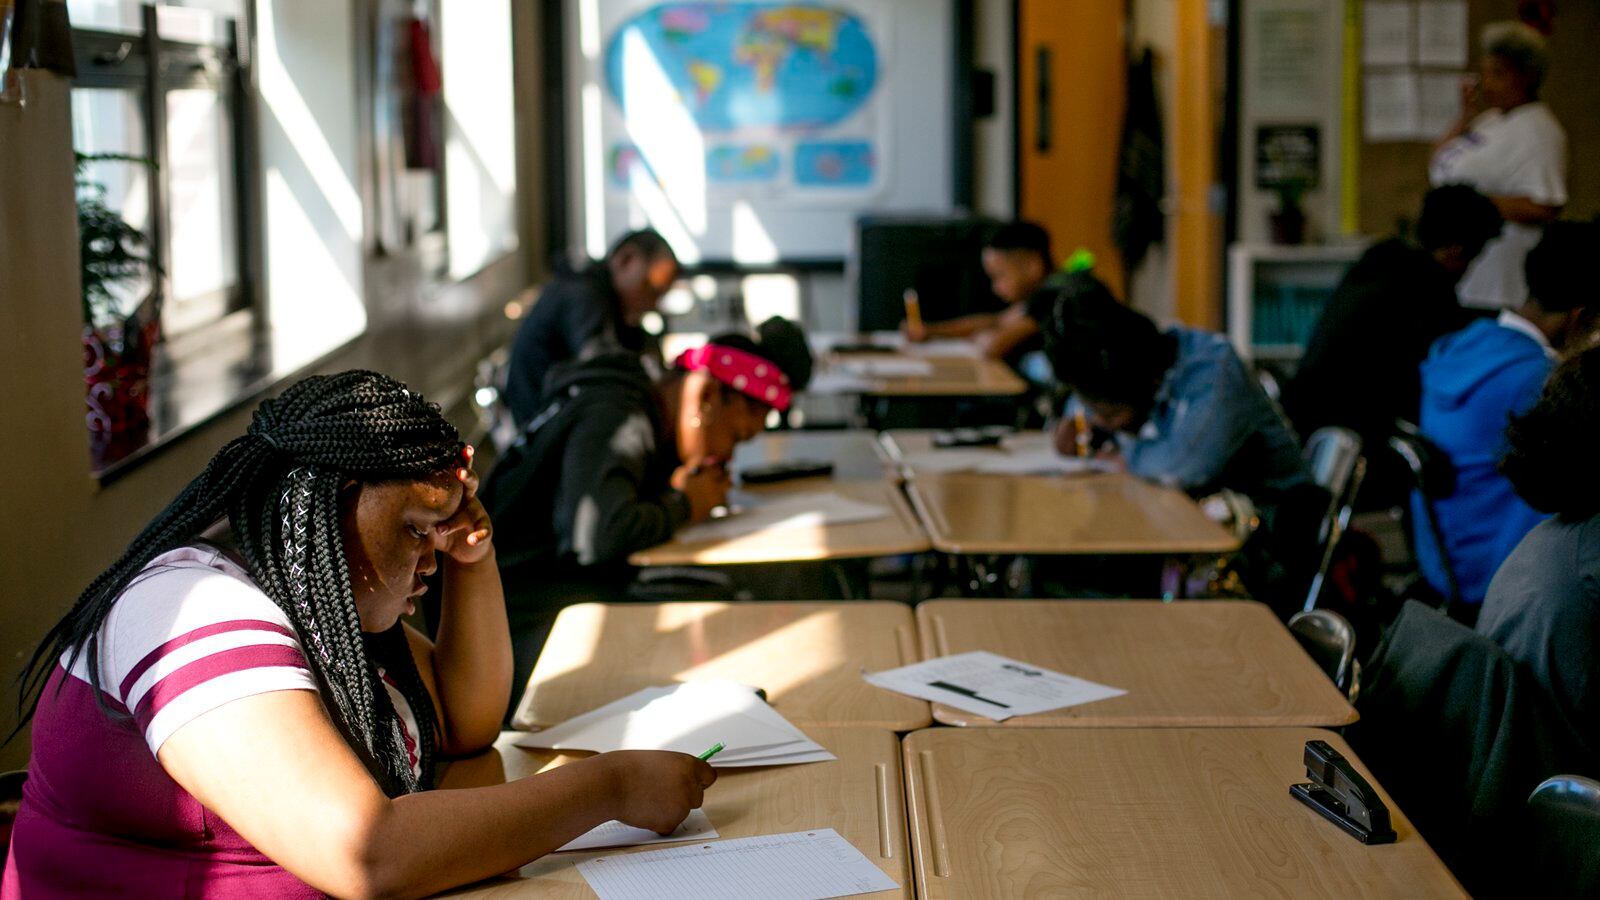 Students at work in a math class at Southeastern High School in Detroit.